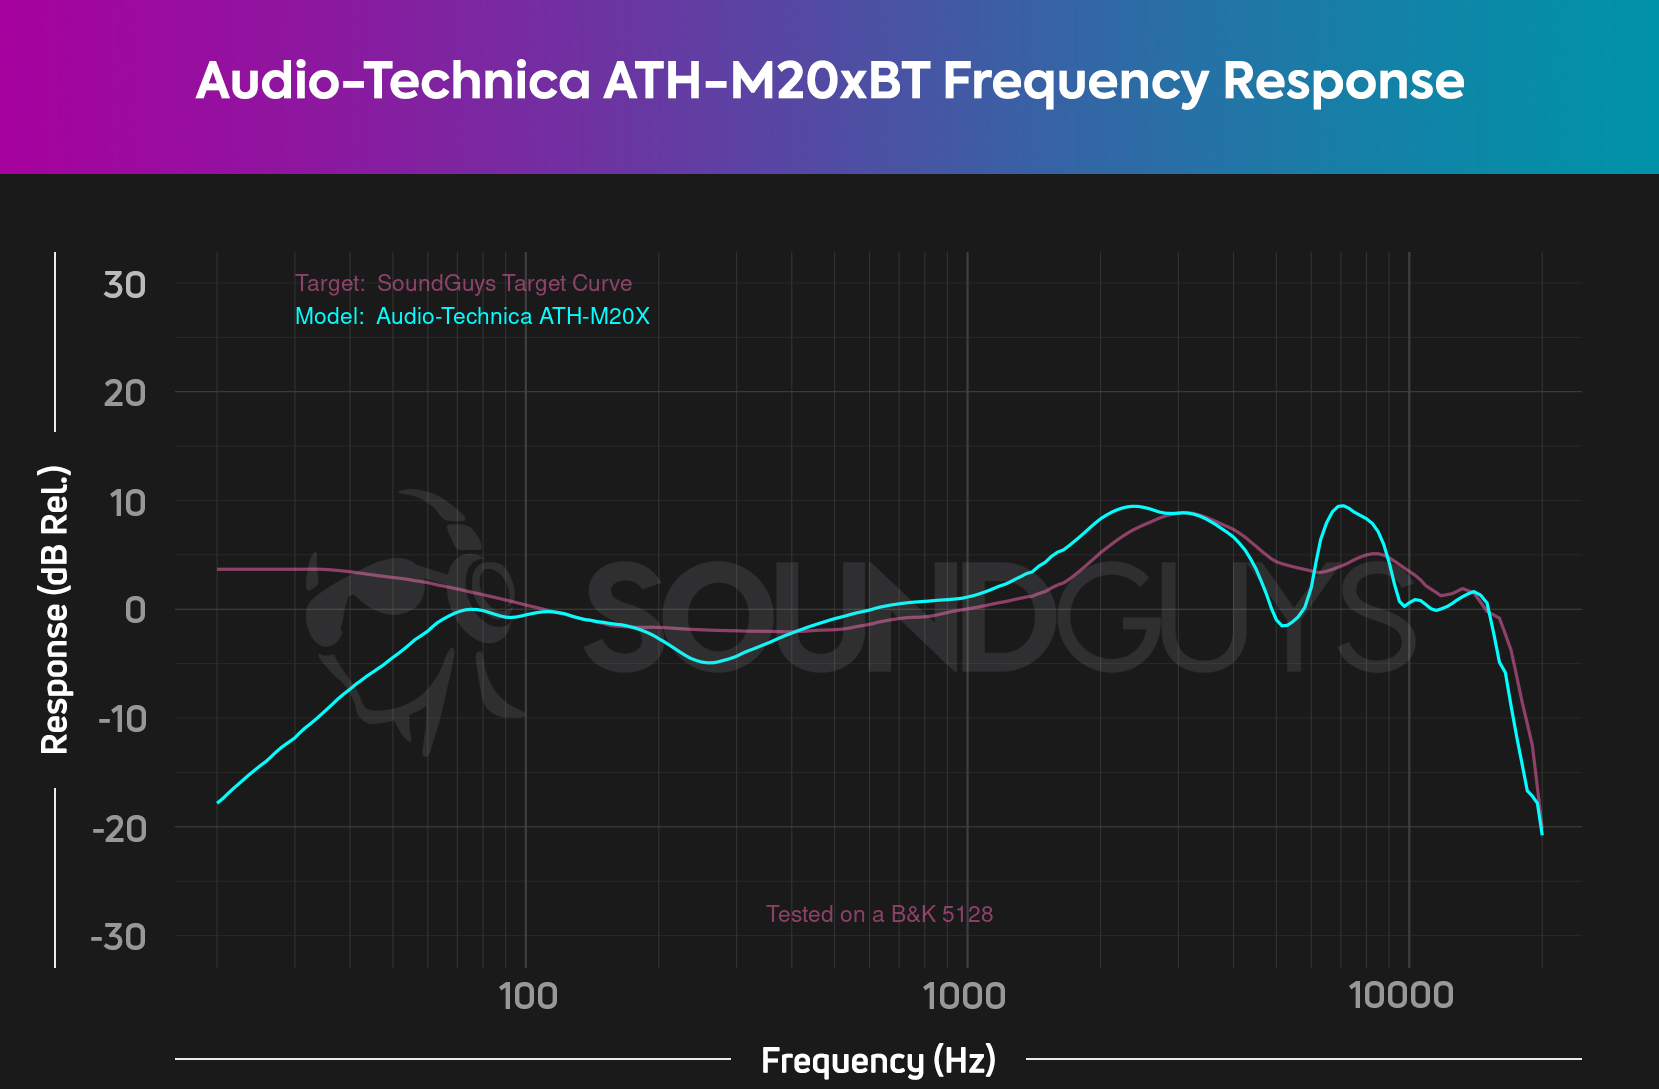 A chart showing the frequency response of the Audio-Technica ATH-M20XBT, showing a bass rolloff under 50Hz and a range of strange emphasis in the highs.